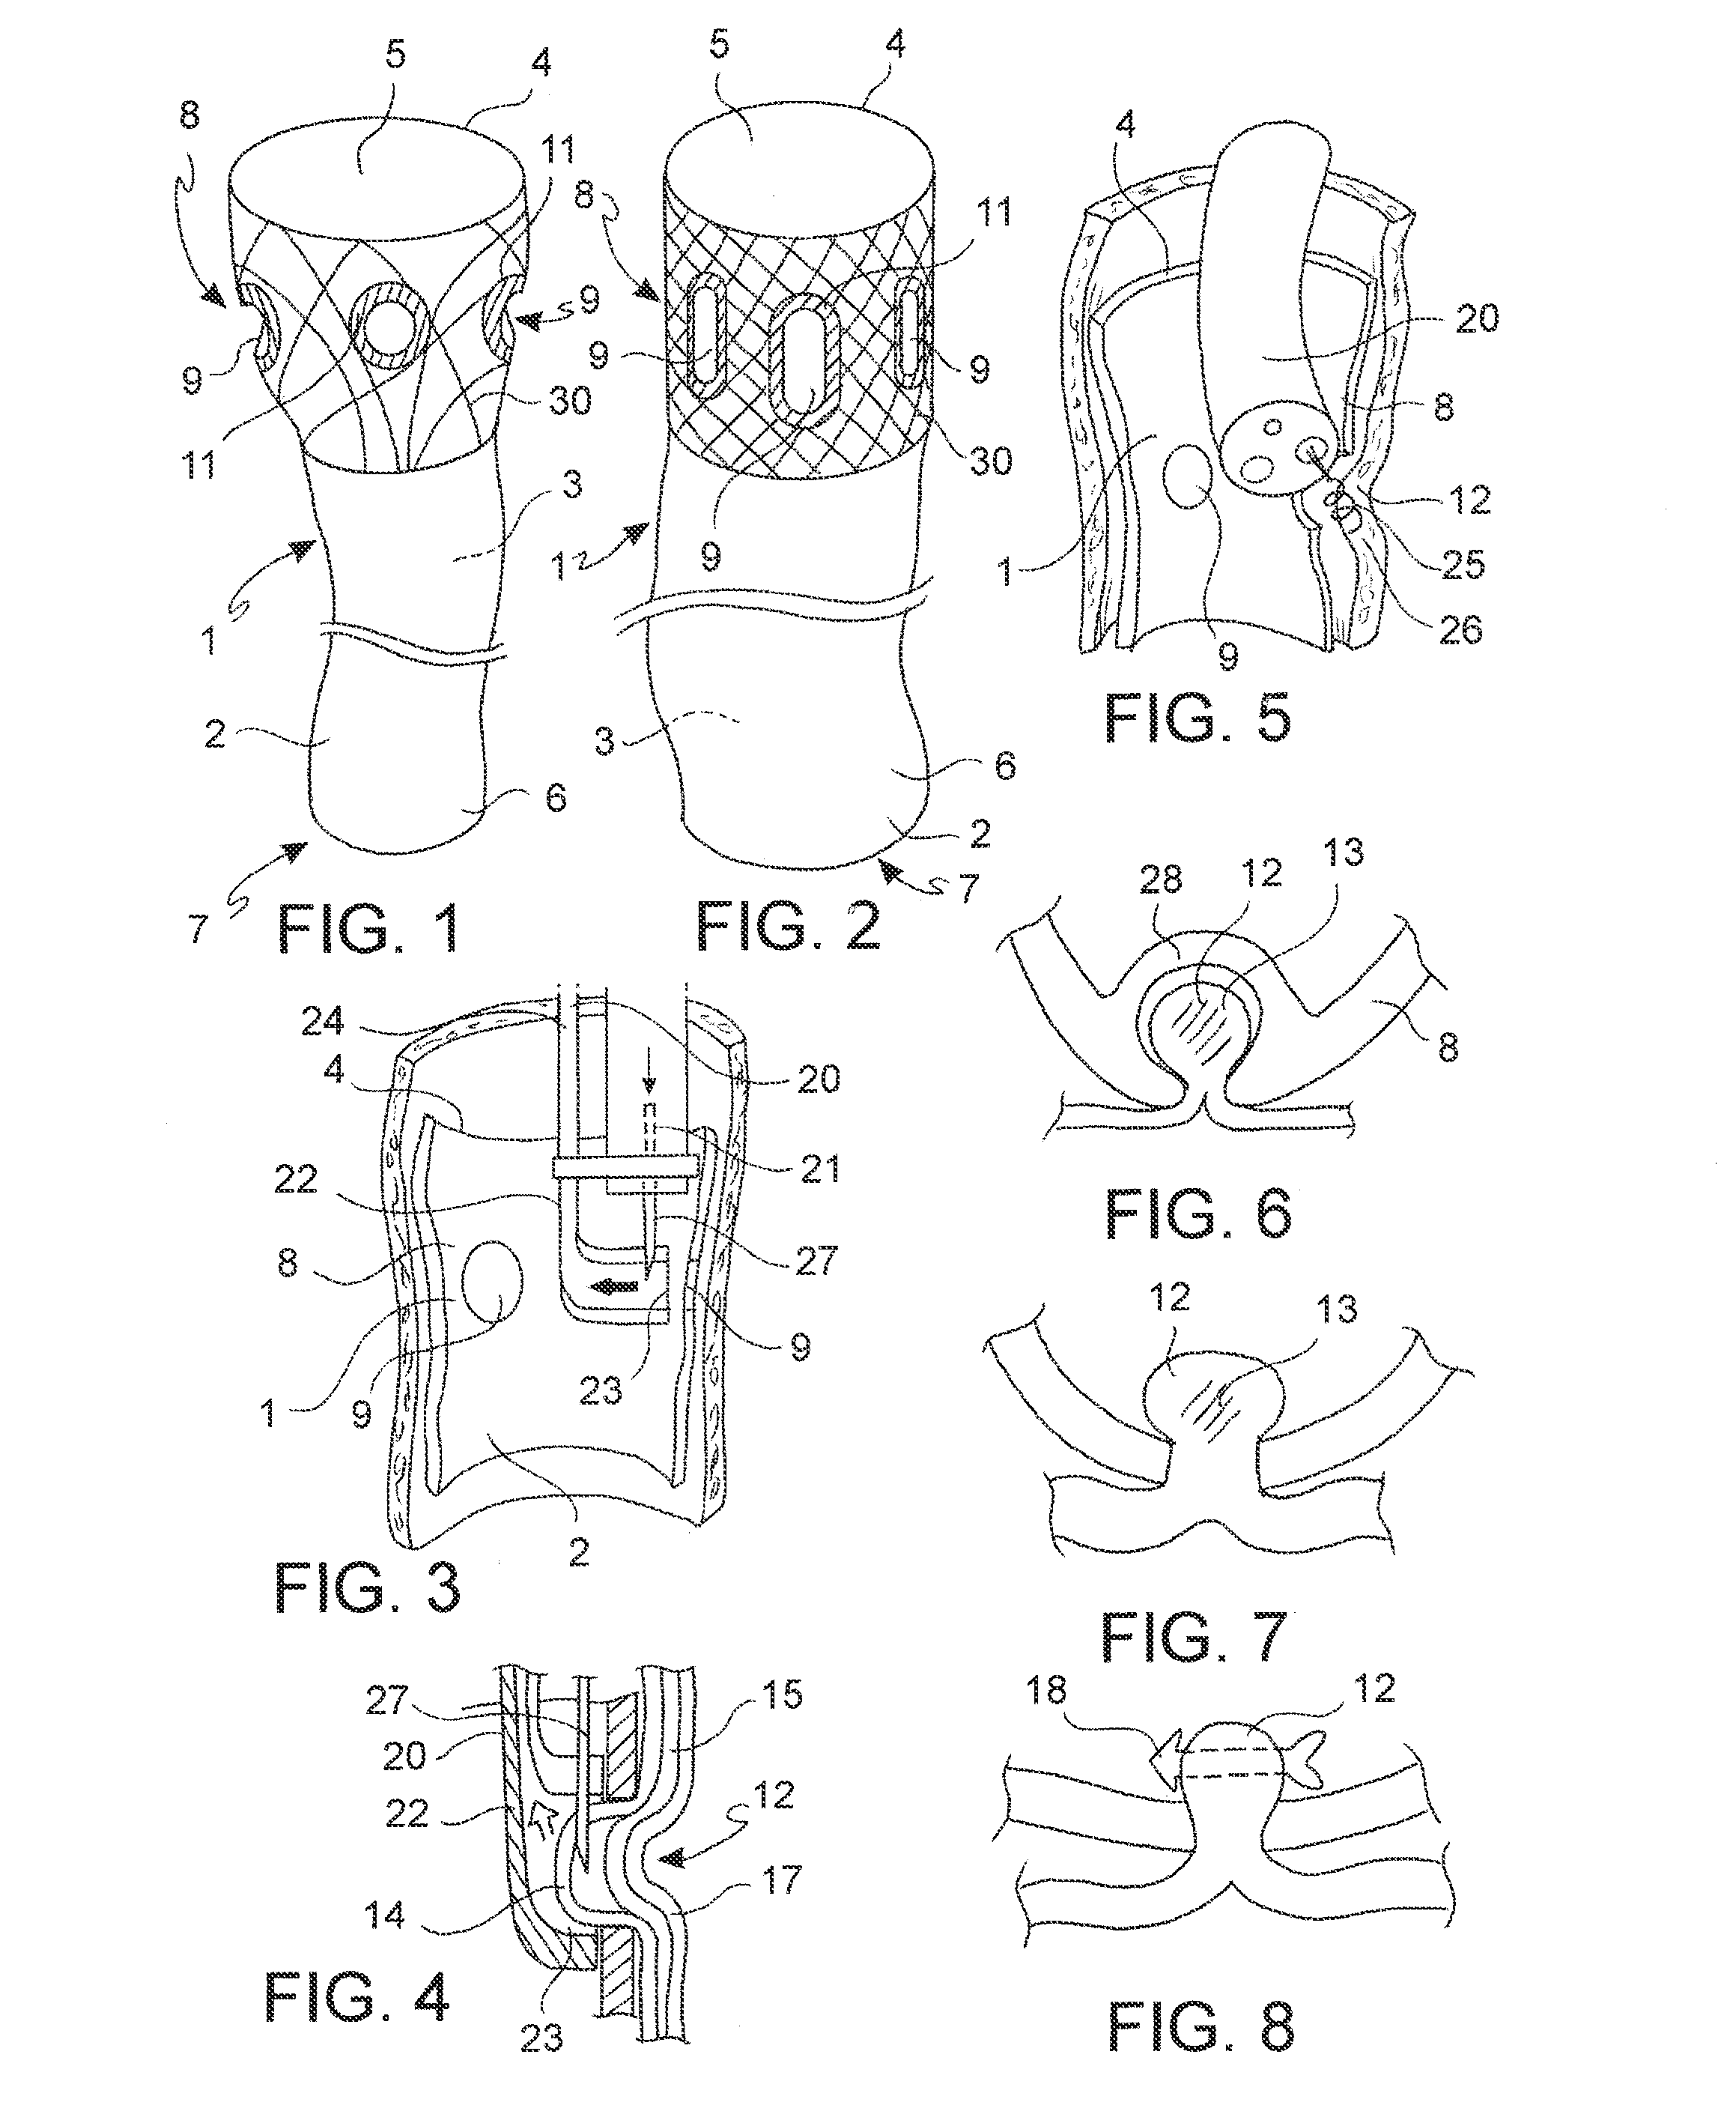 Device for Anchoring an Endoluminal Sleeve in the GI Tract